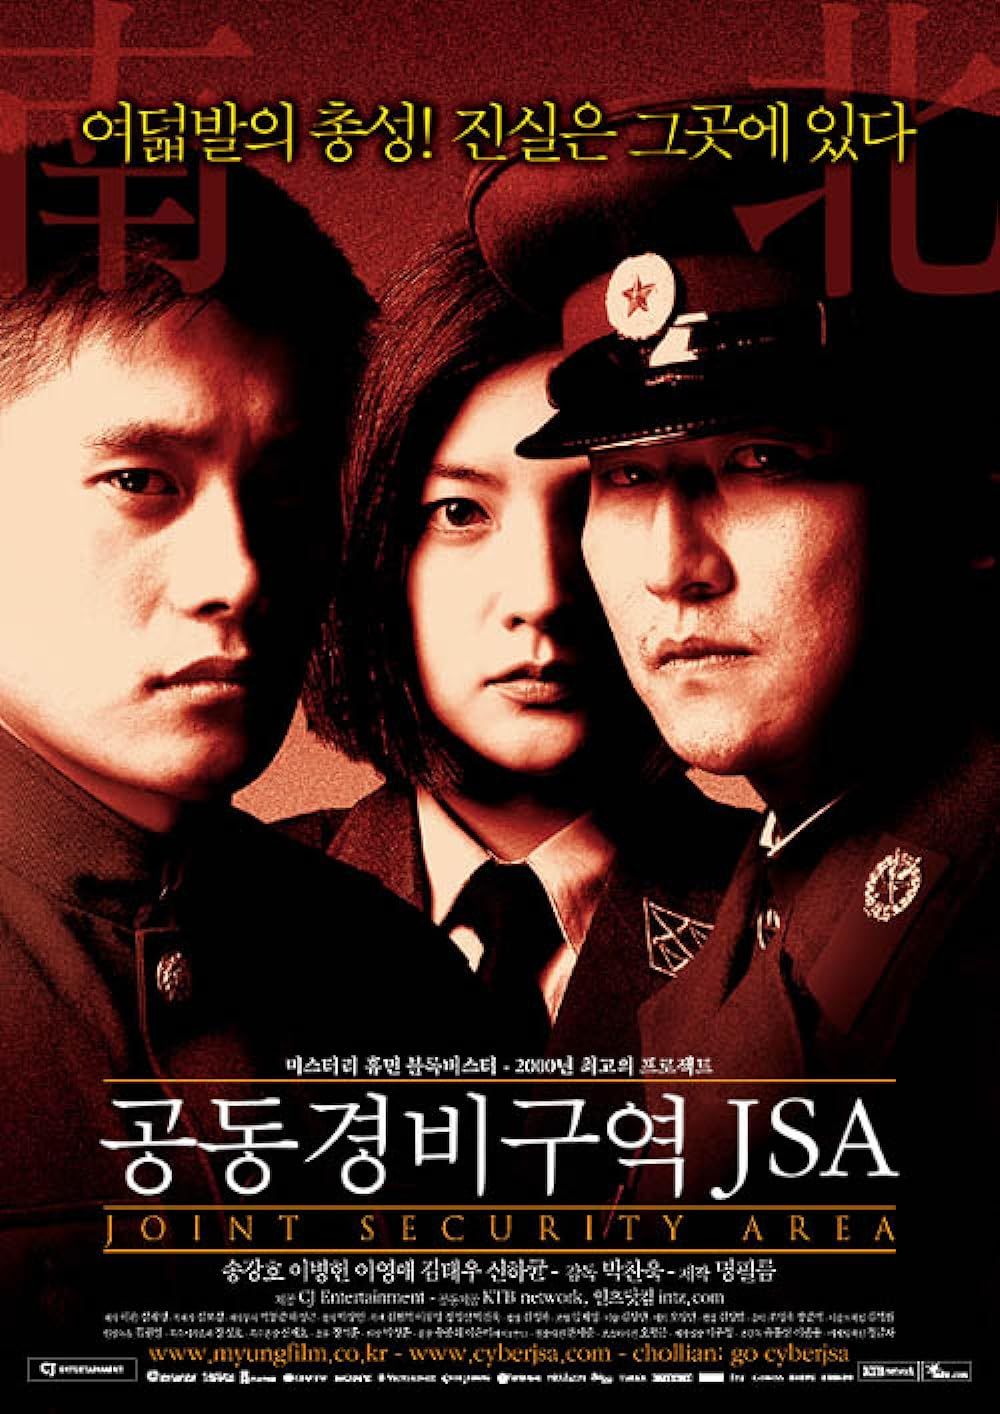 The Main Cast stand together on the Joint Security Area Poster